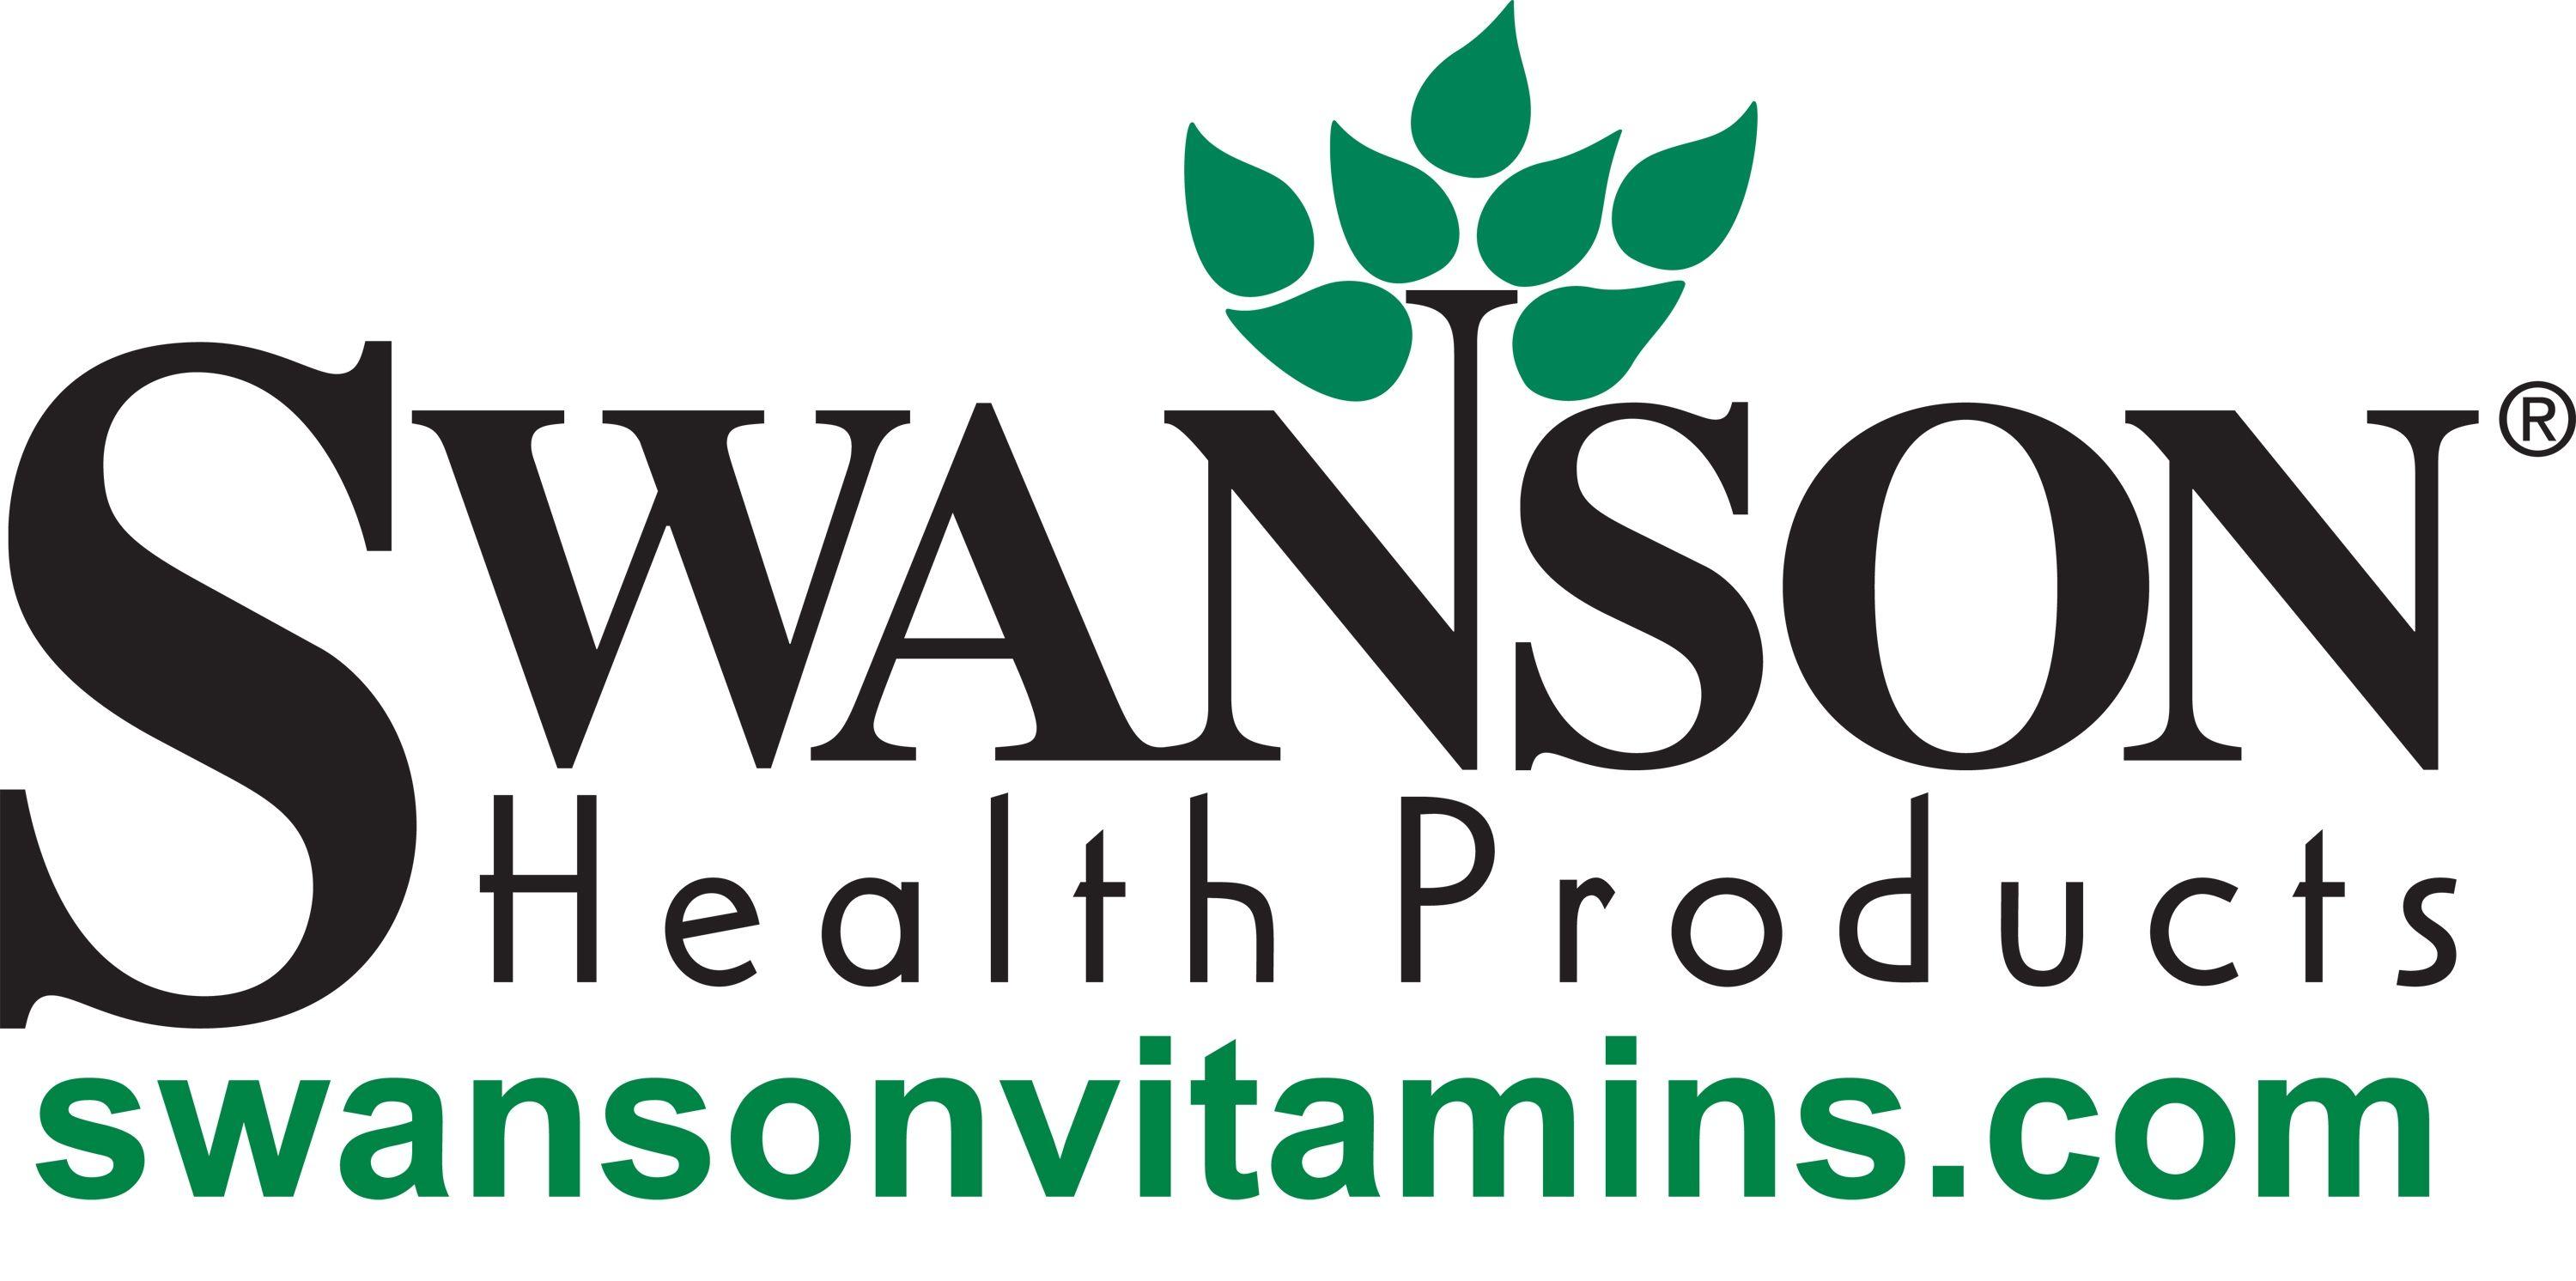 Swanson Logo - Swanson Health Products: $5 Off Coupon Code - Southern Savers